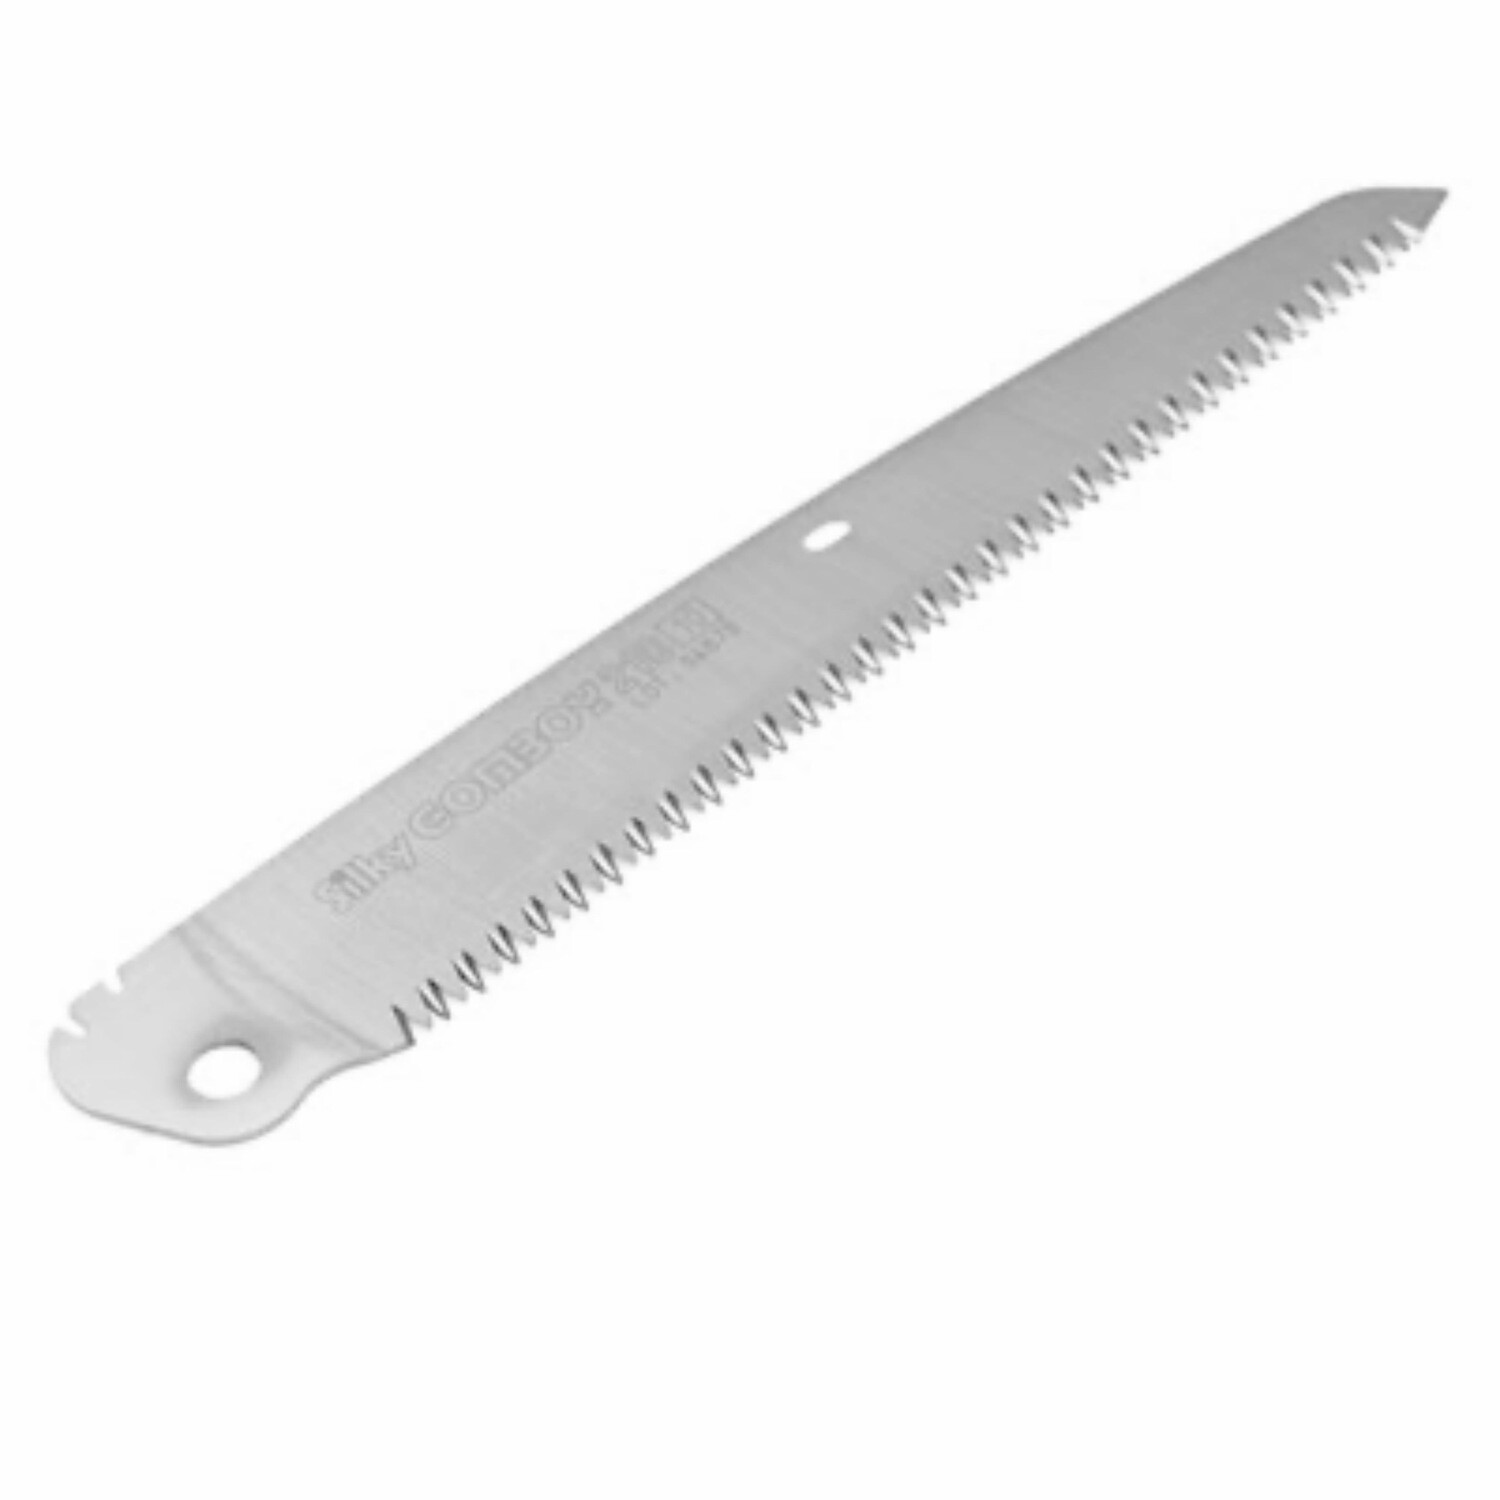 Silky GOMBOY 270mm Medium Teeth, Saw Replacement Blade [BLADE ONLY]